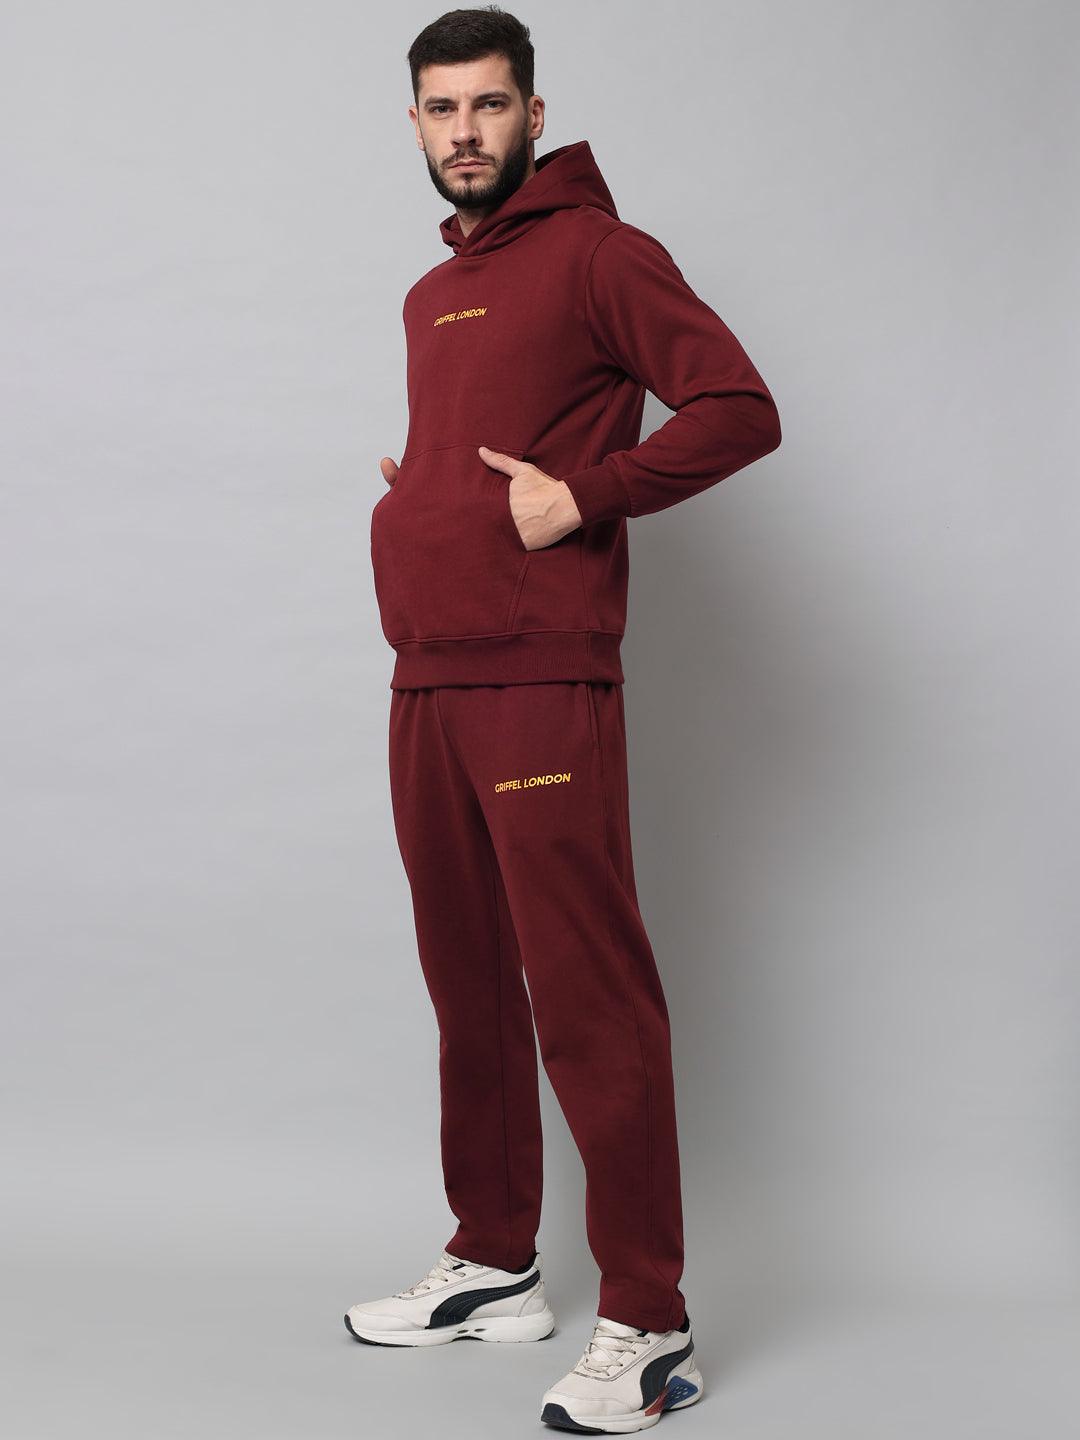 Griffel Men's Front Logo Solid Fleece Basic Hoodie and Joggers Full set Maroon Tracksuit - griffel